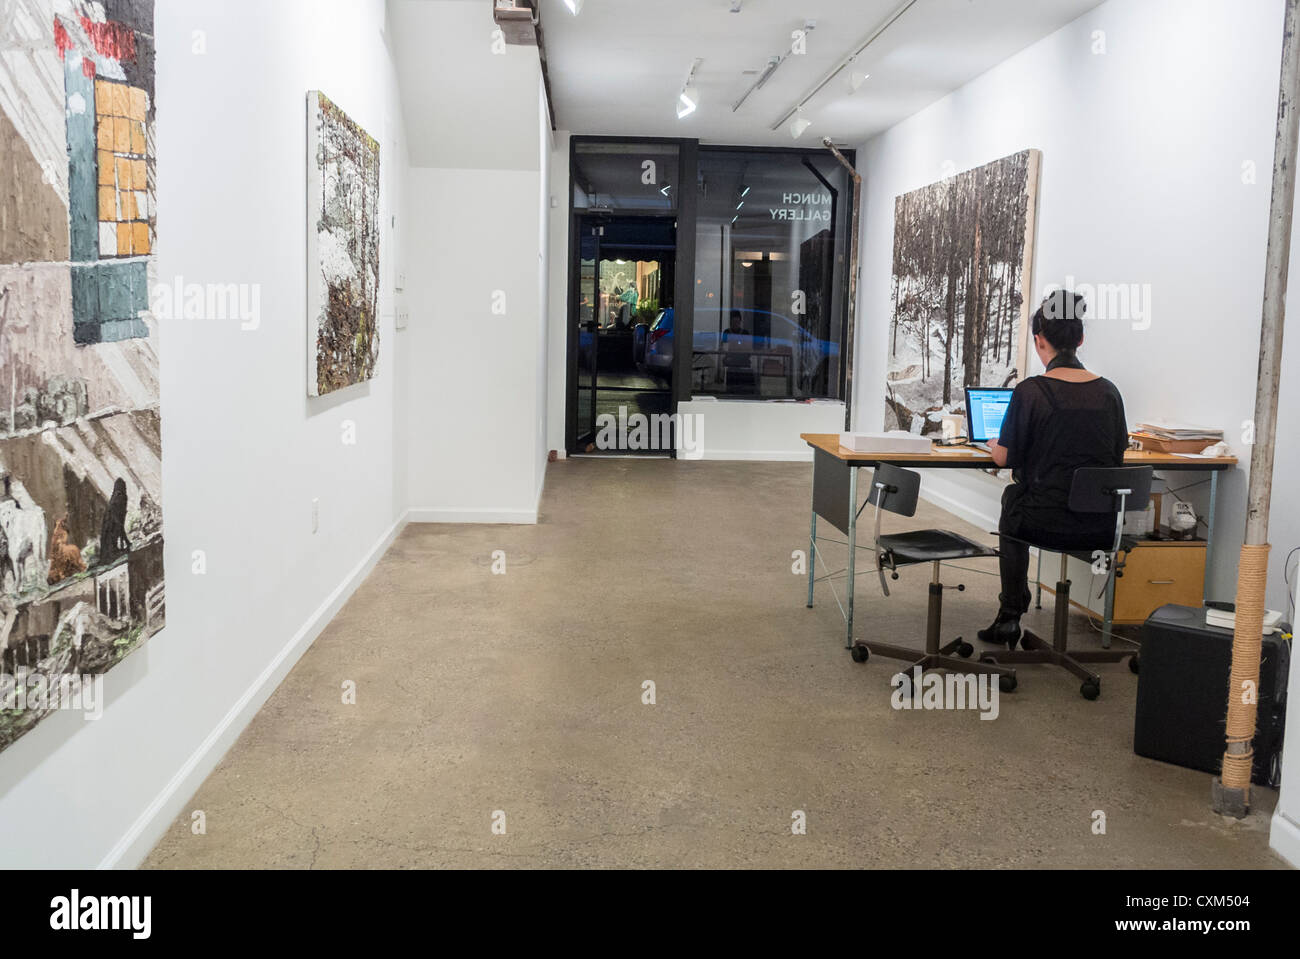 New York City, NY, USA, Modern Art Gallery, 'Munch Gallery', modern paintings on Display inside, in the Lower East Side, Manhattan, Commercial Interiors, woman sitting alone from behind Stock Photo